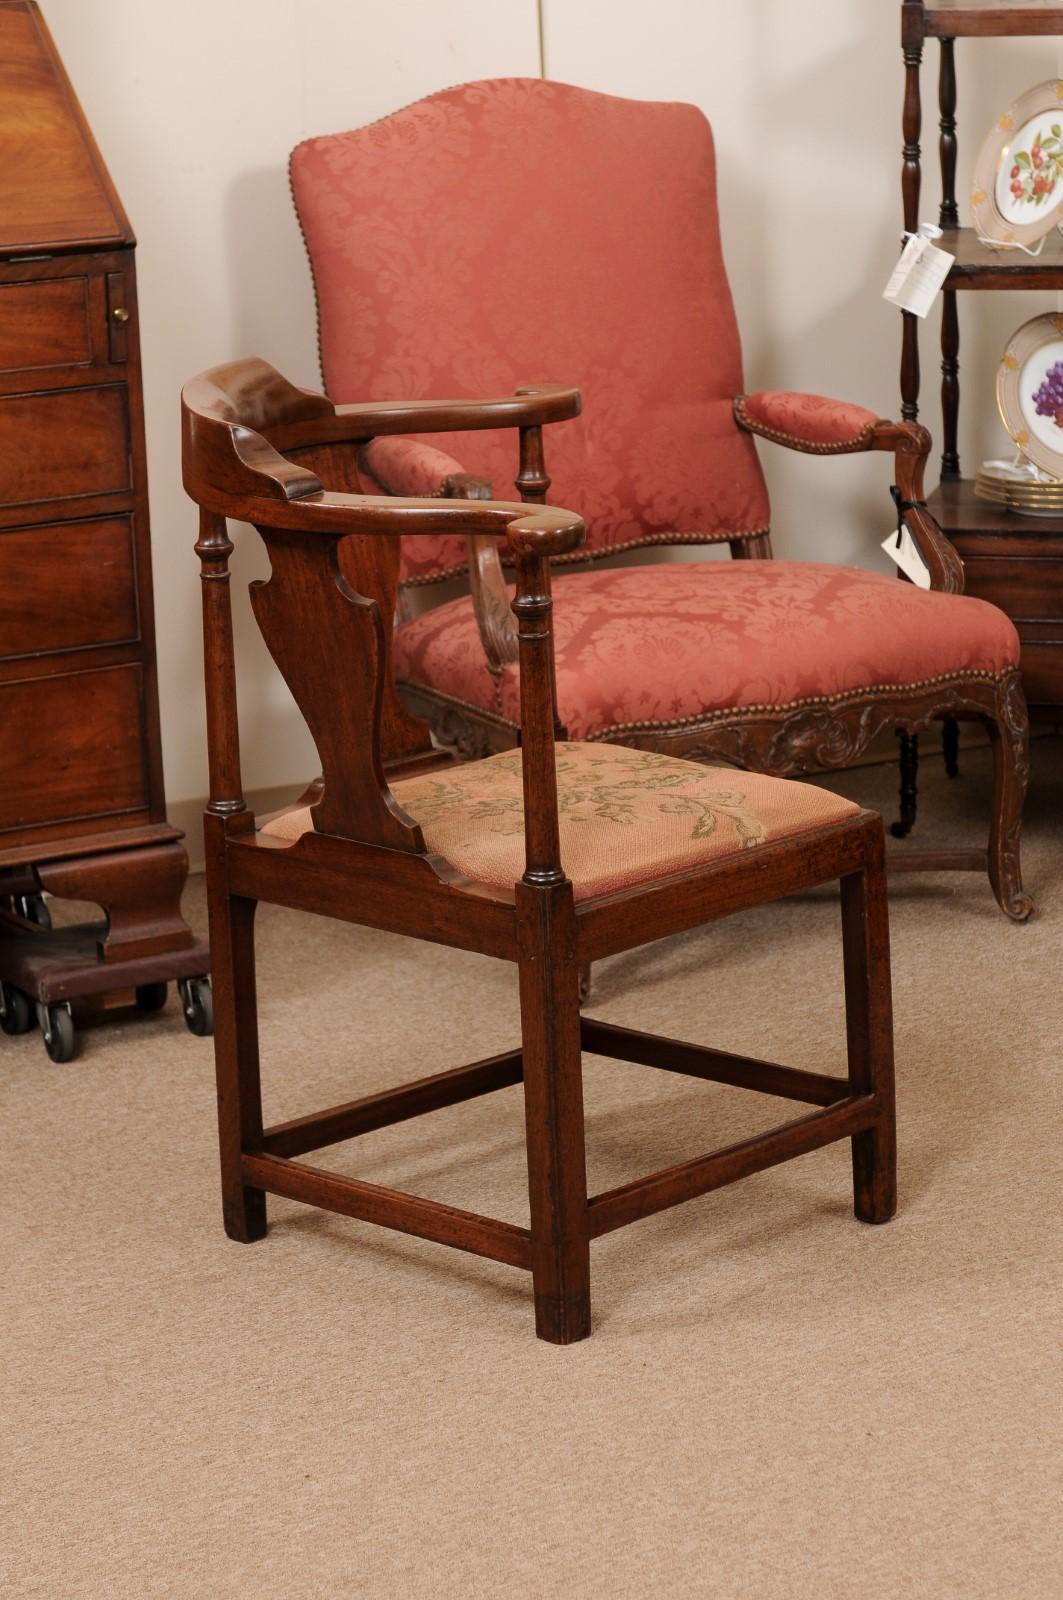 18th Century English Mahogany Corner Chair with Rounded Back, Slip Seat 4